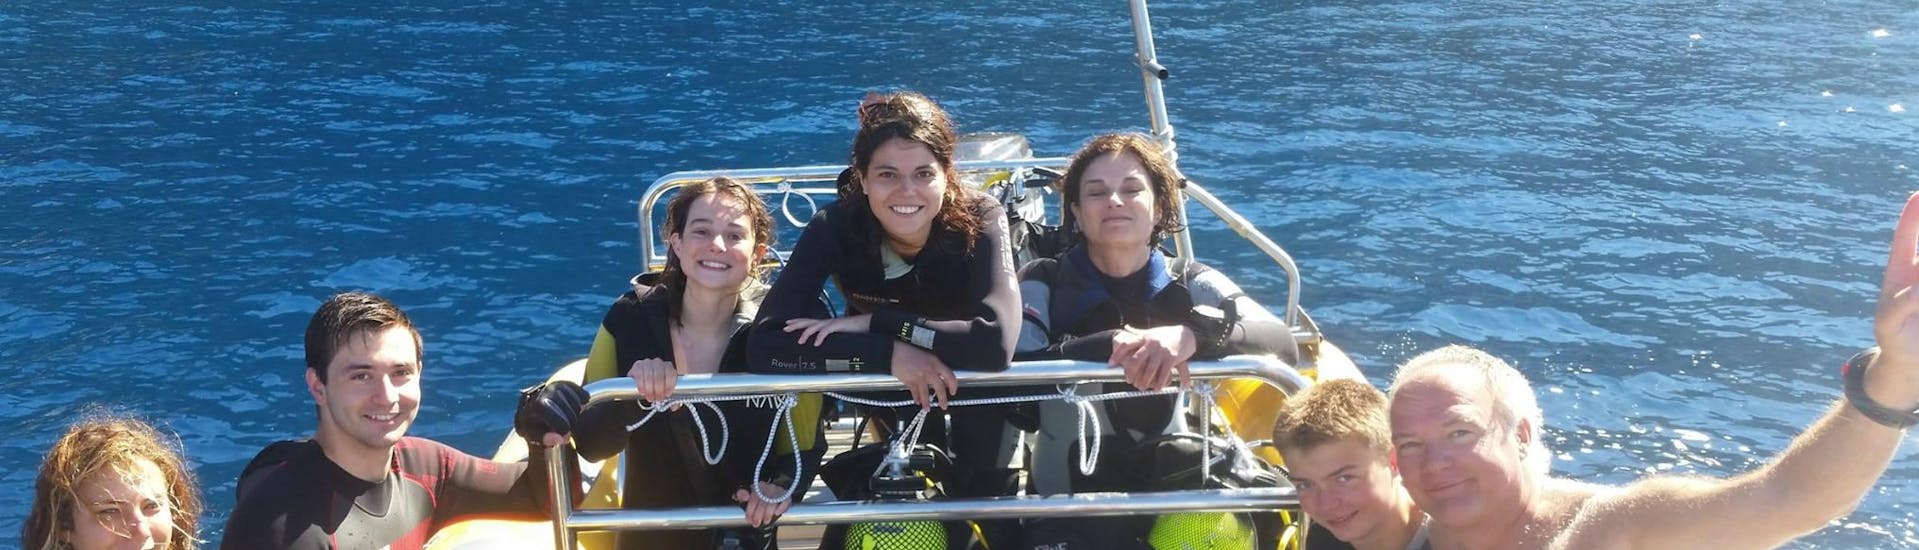 Divers on the boat during the snorkeling excursion in Faial with Haliotis Faial.